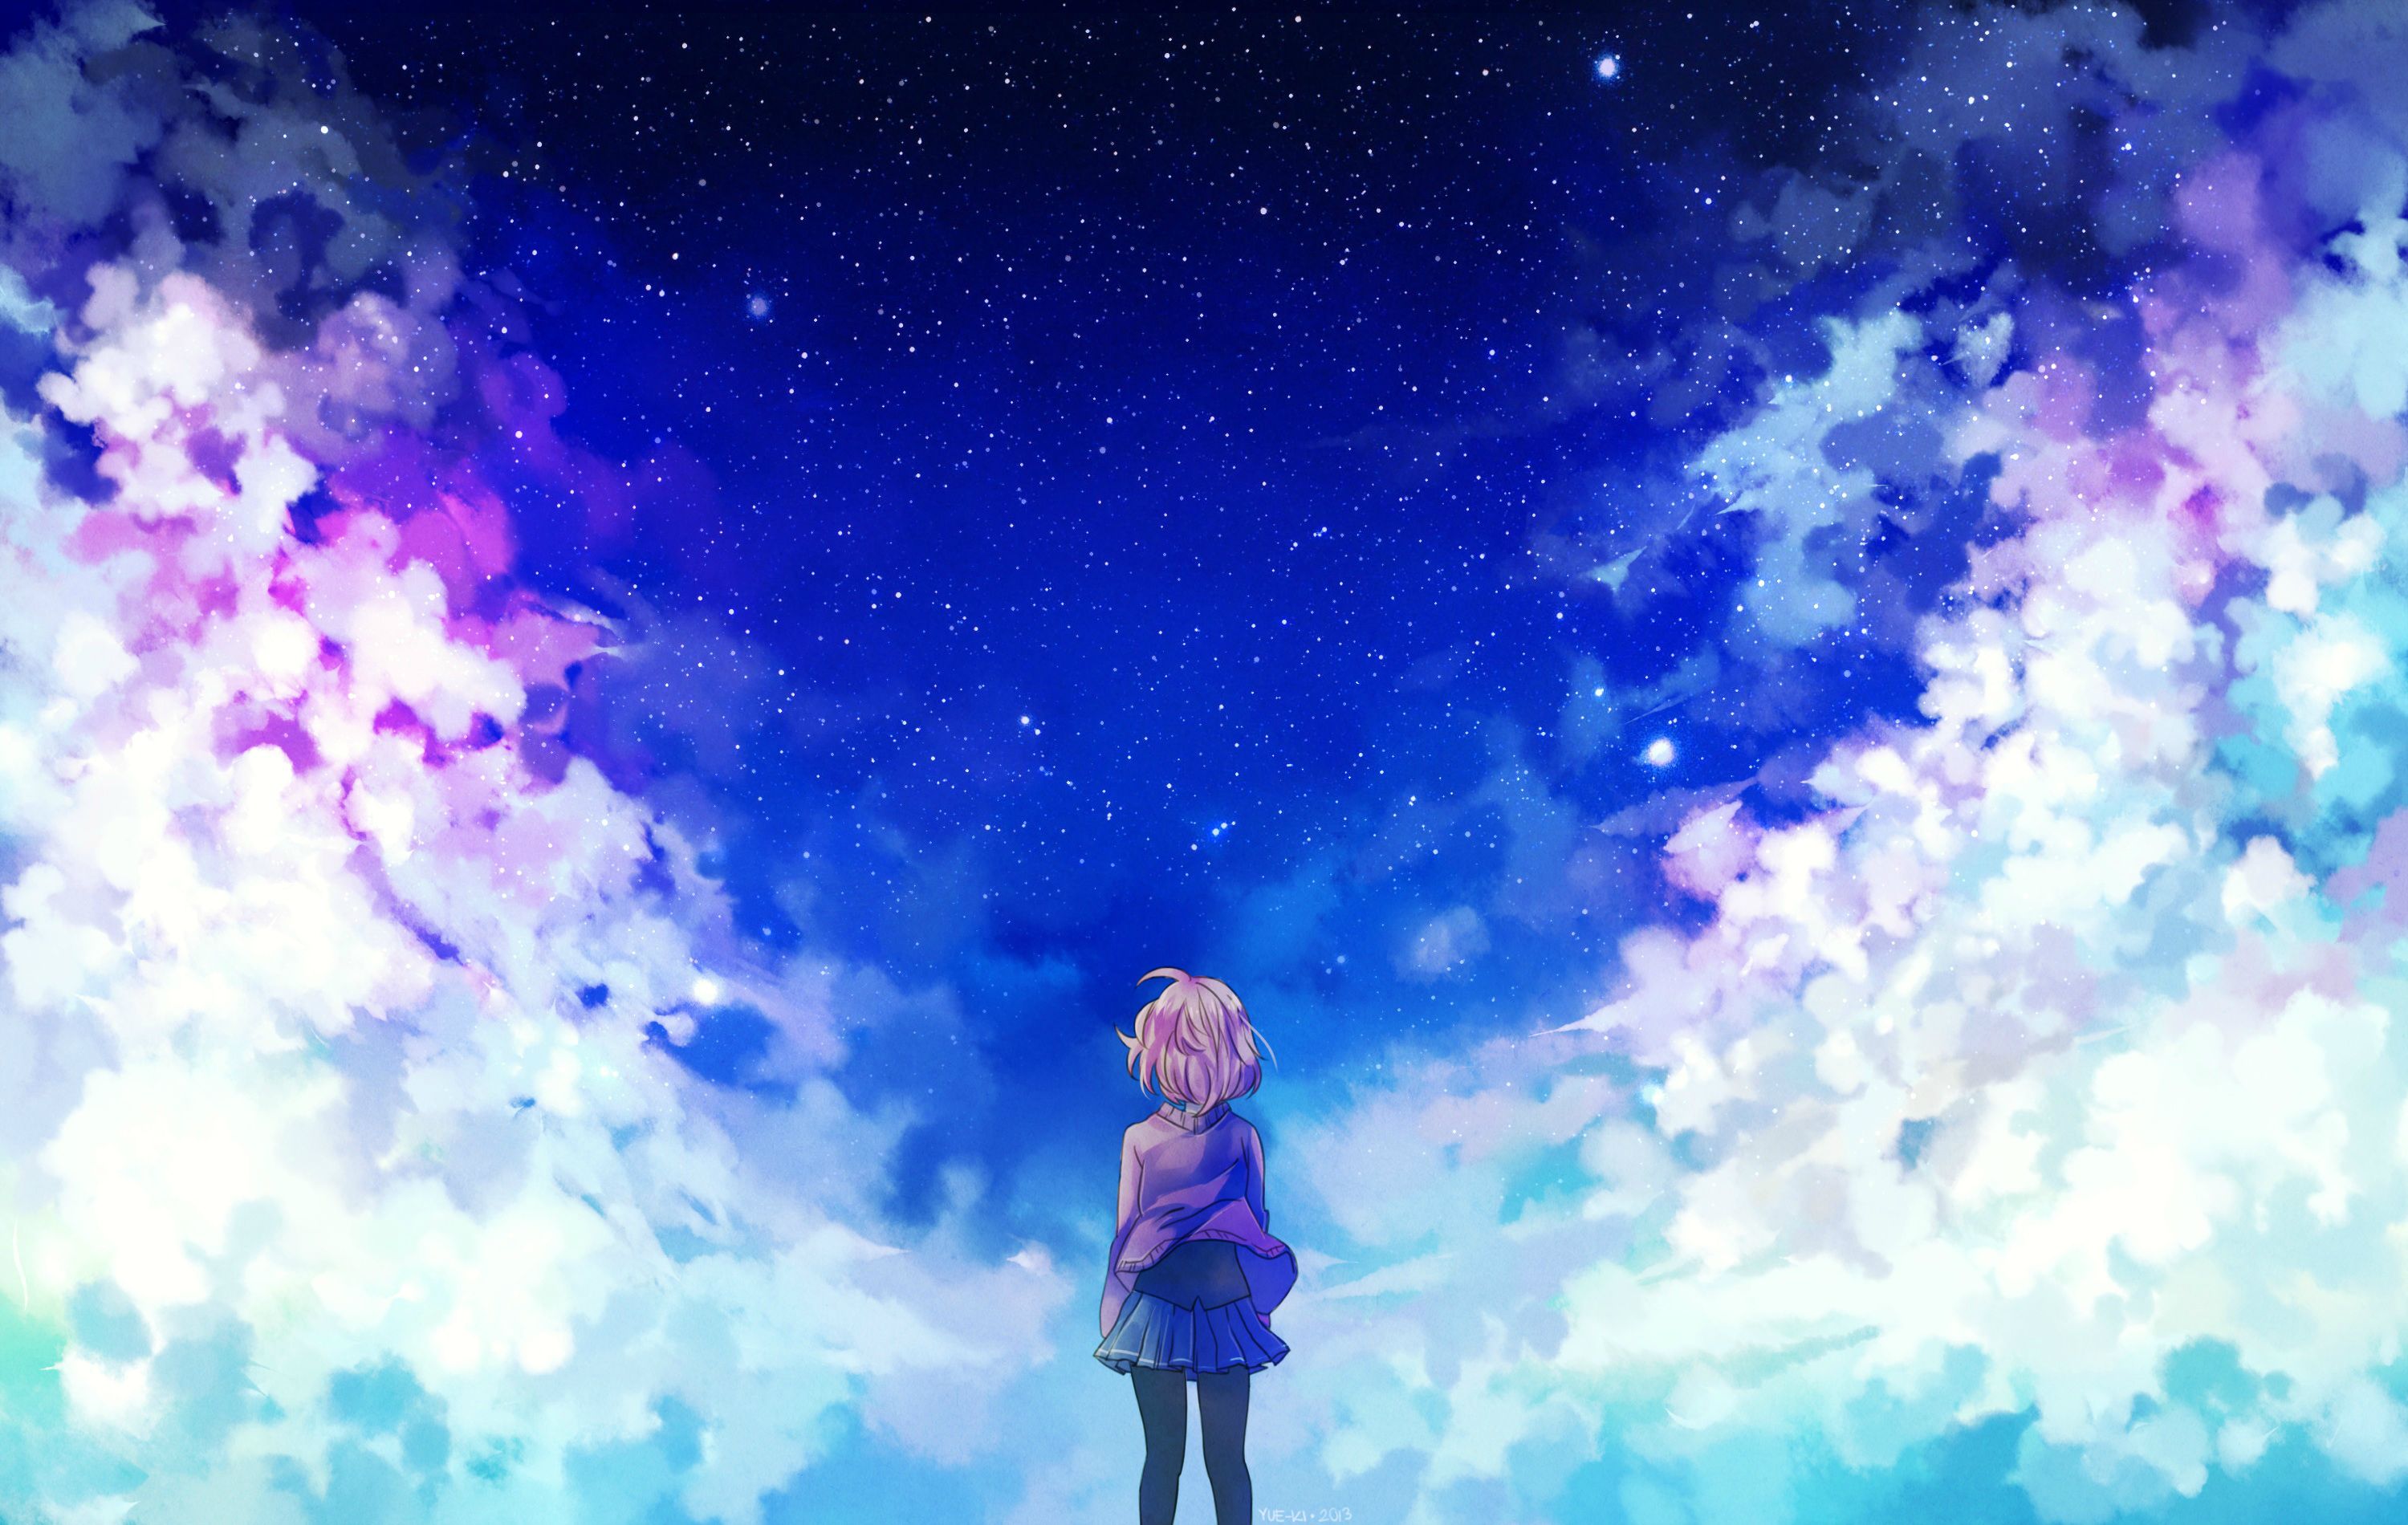 Beyond The Boundary HD Wallpaper Background Image